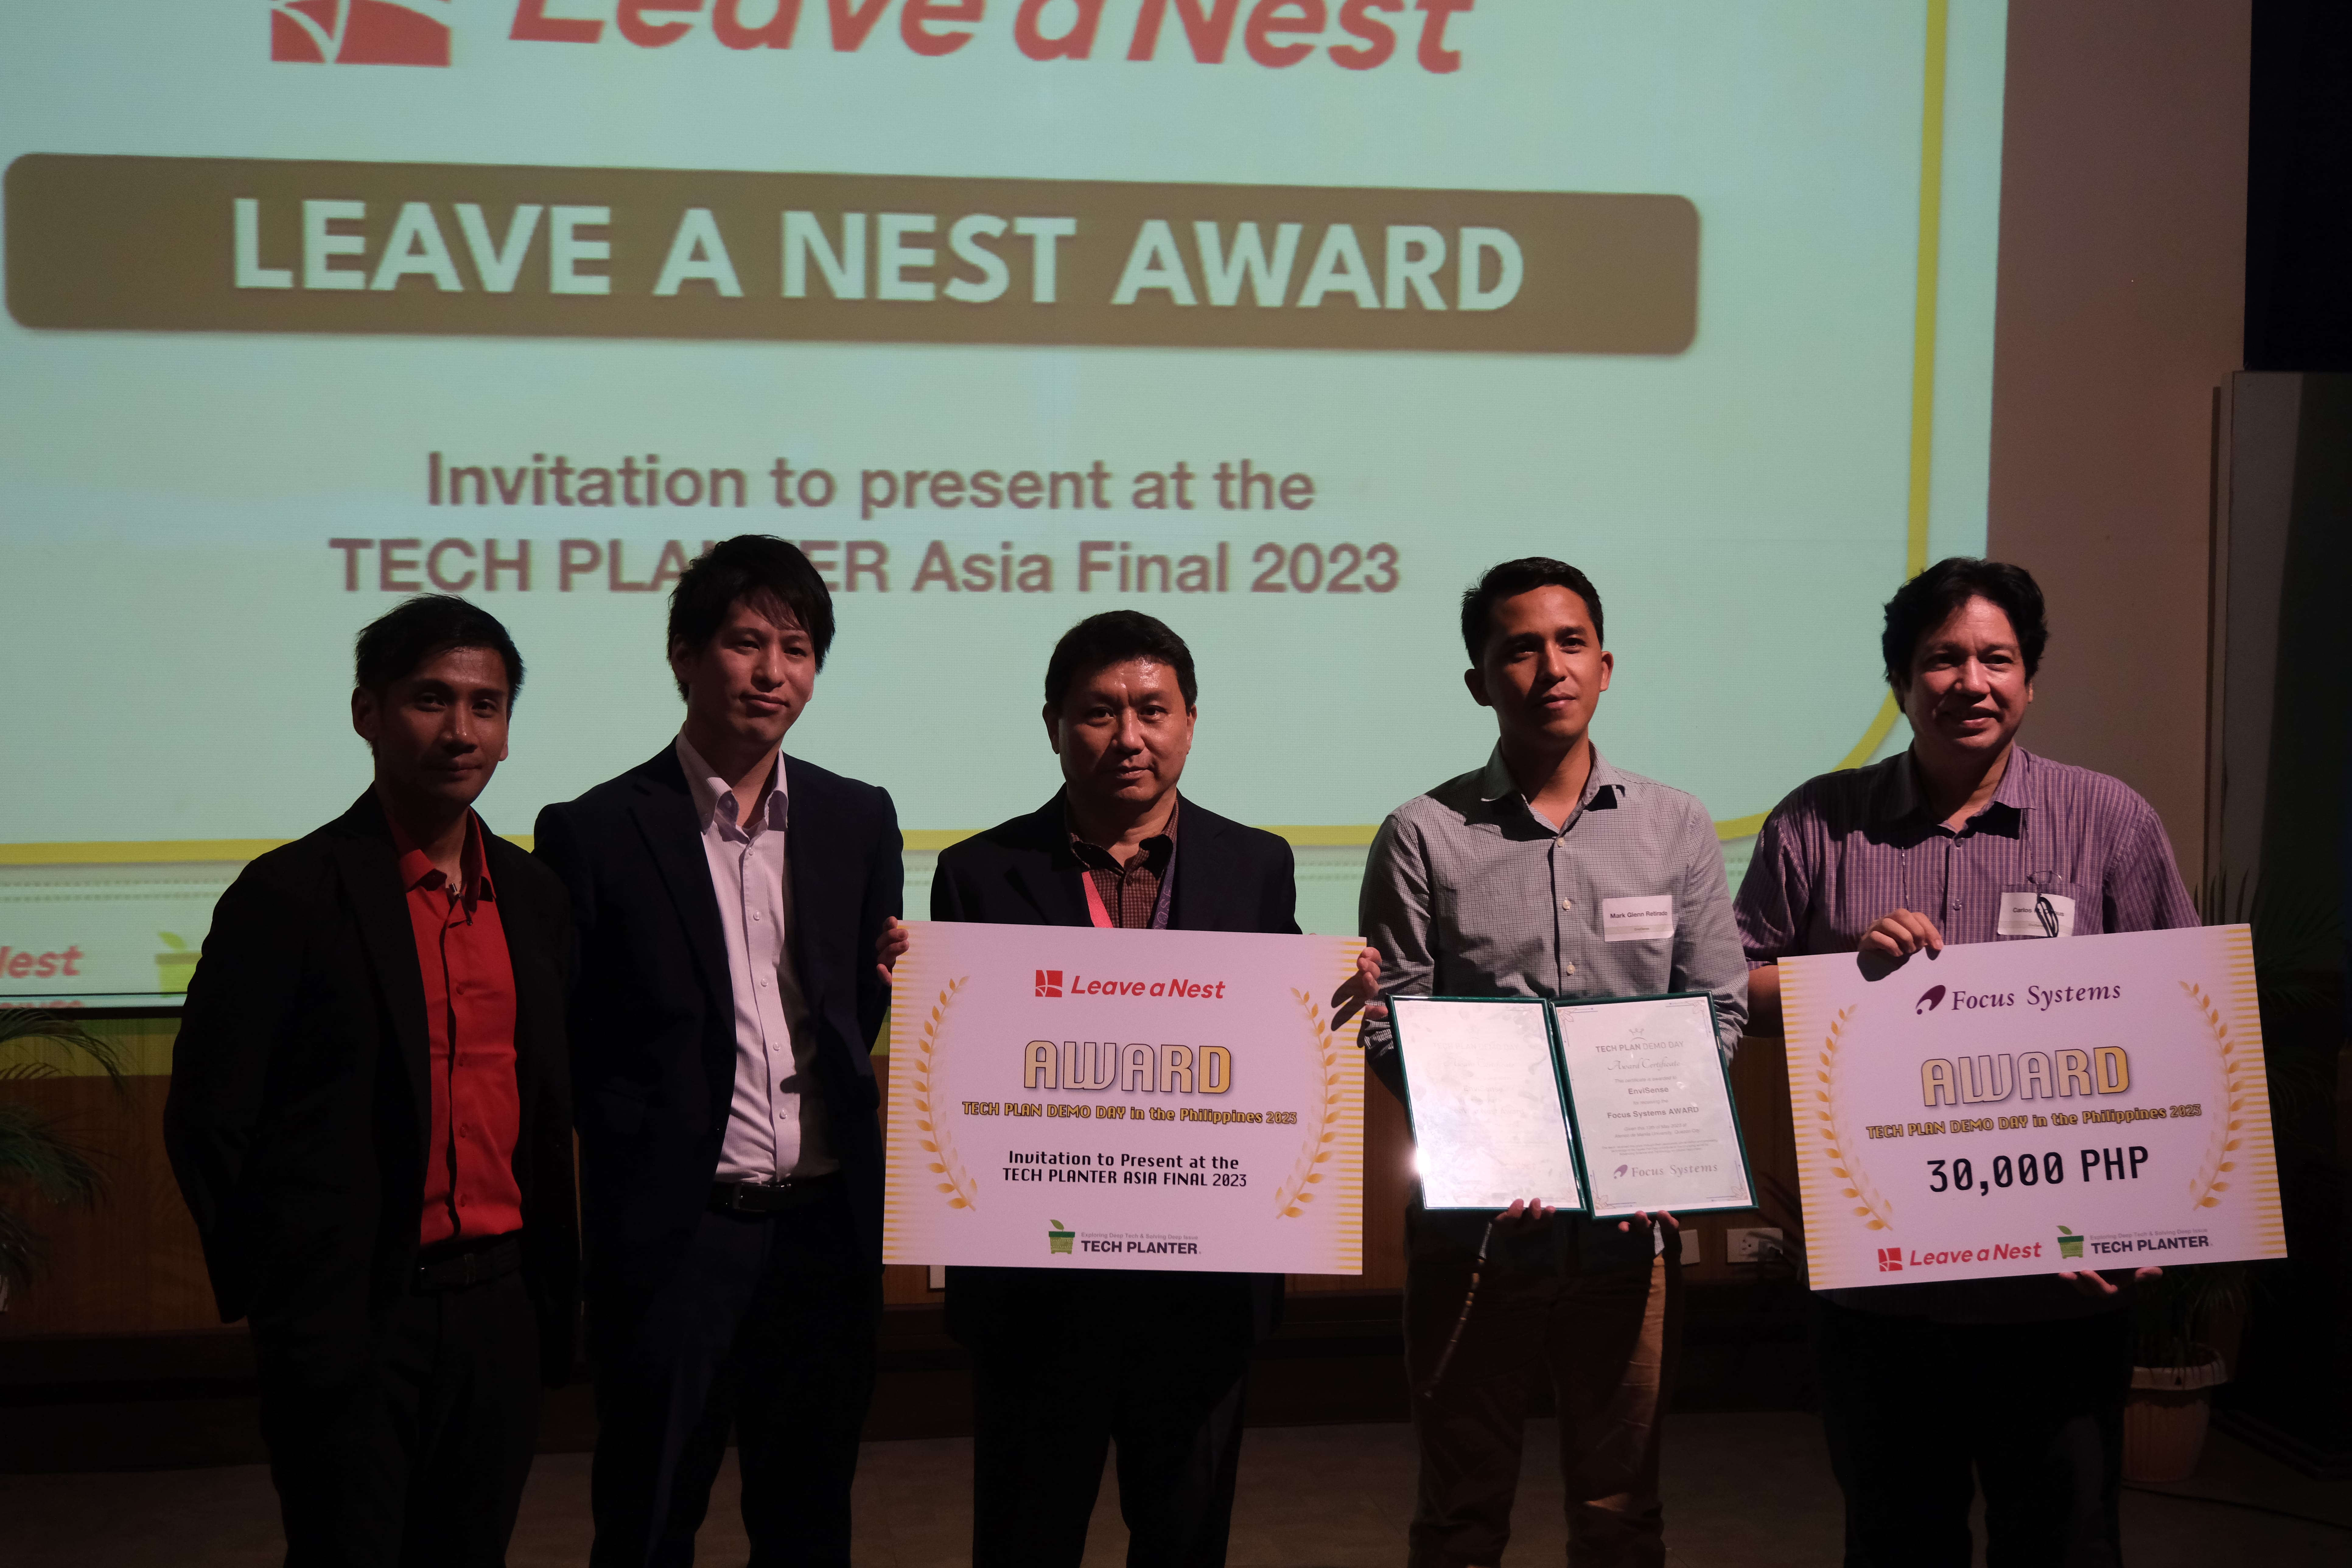 Mr Ryo Inori of Focus Systems Corporation and Dr Yevgeny Aster Dulla of Leave a Nest Philippines with EnviSense